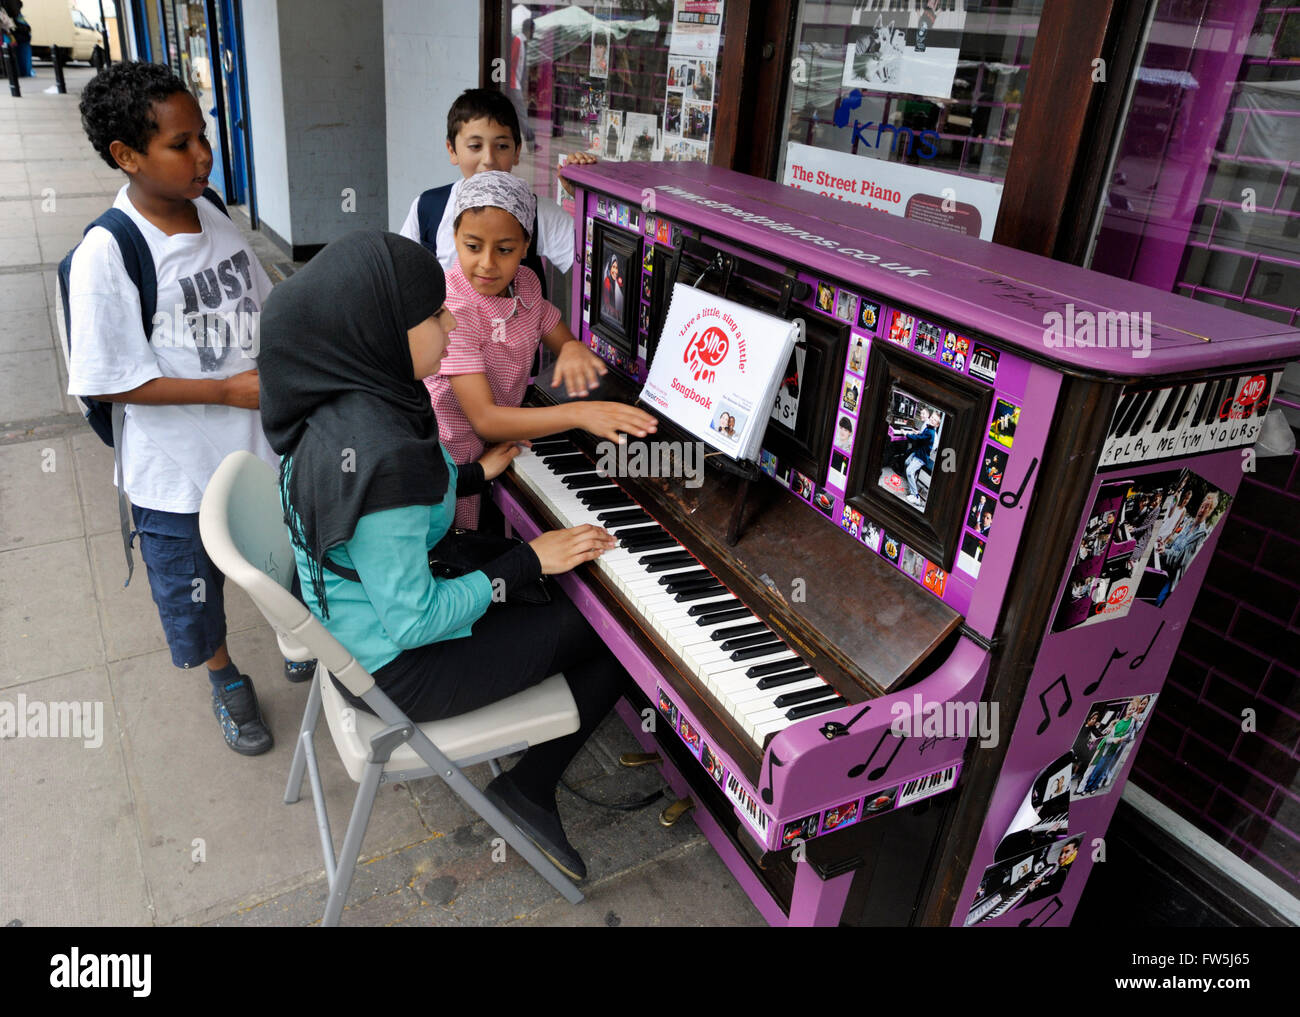 Asian children on street market playing old upright piano (by Chappell),  painted purple. Part of Streetpiano.co.uk 'Play me, I'm yours' scheme by  artist Luke Jerram, for Sing London and the City of